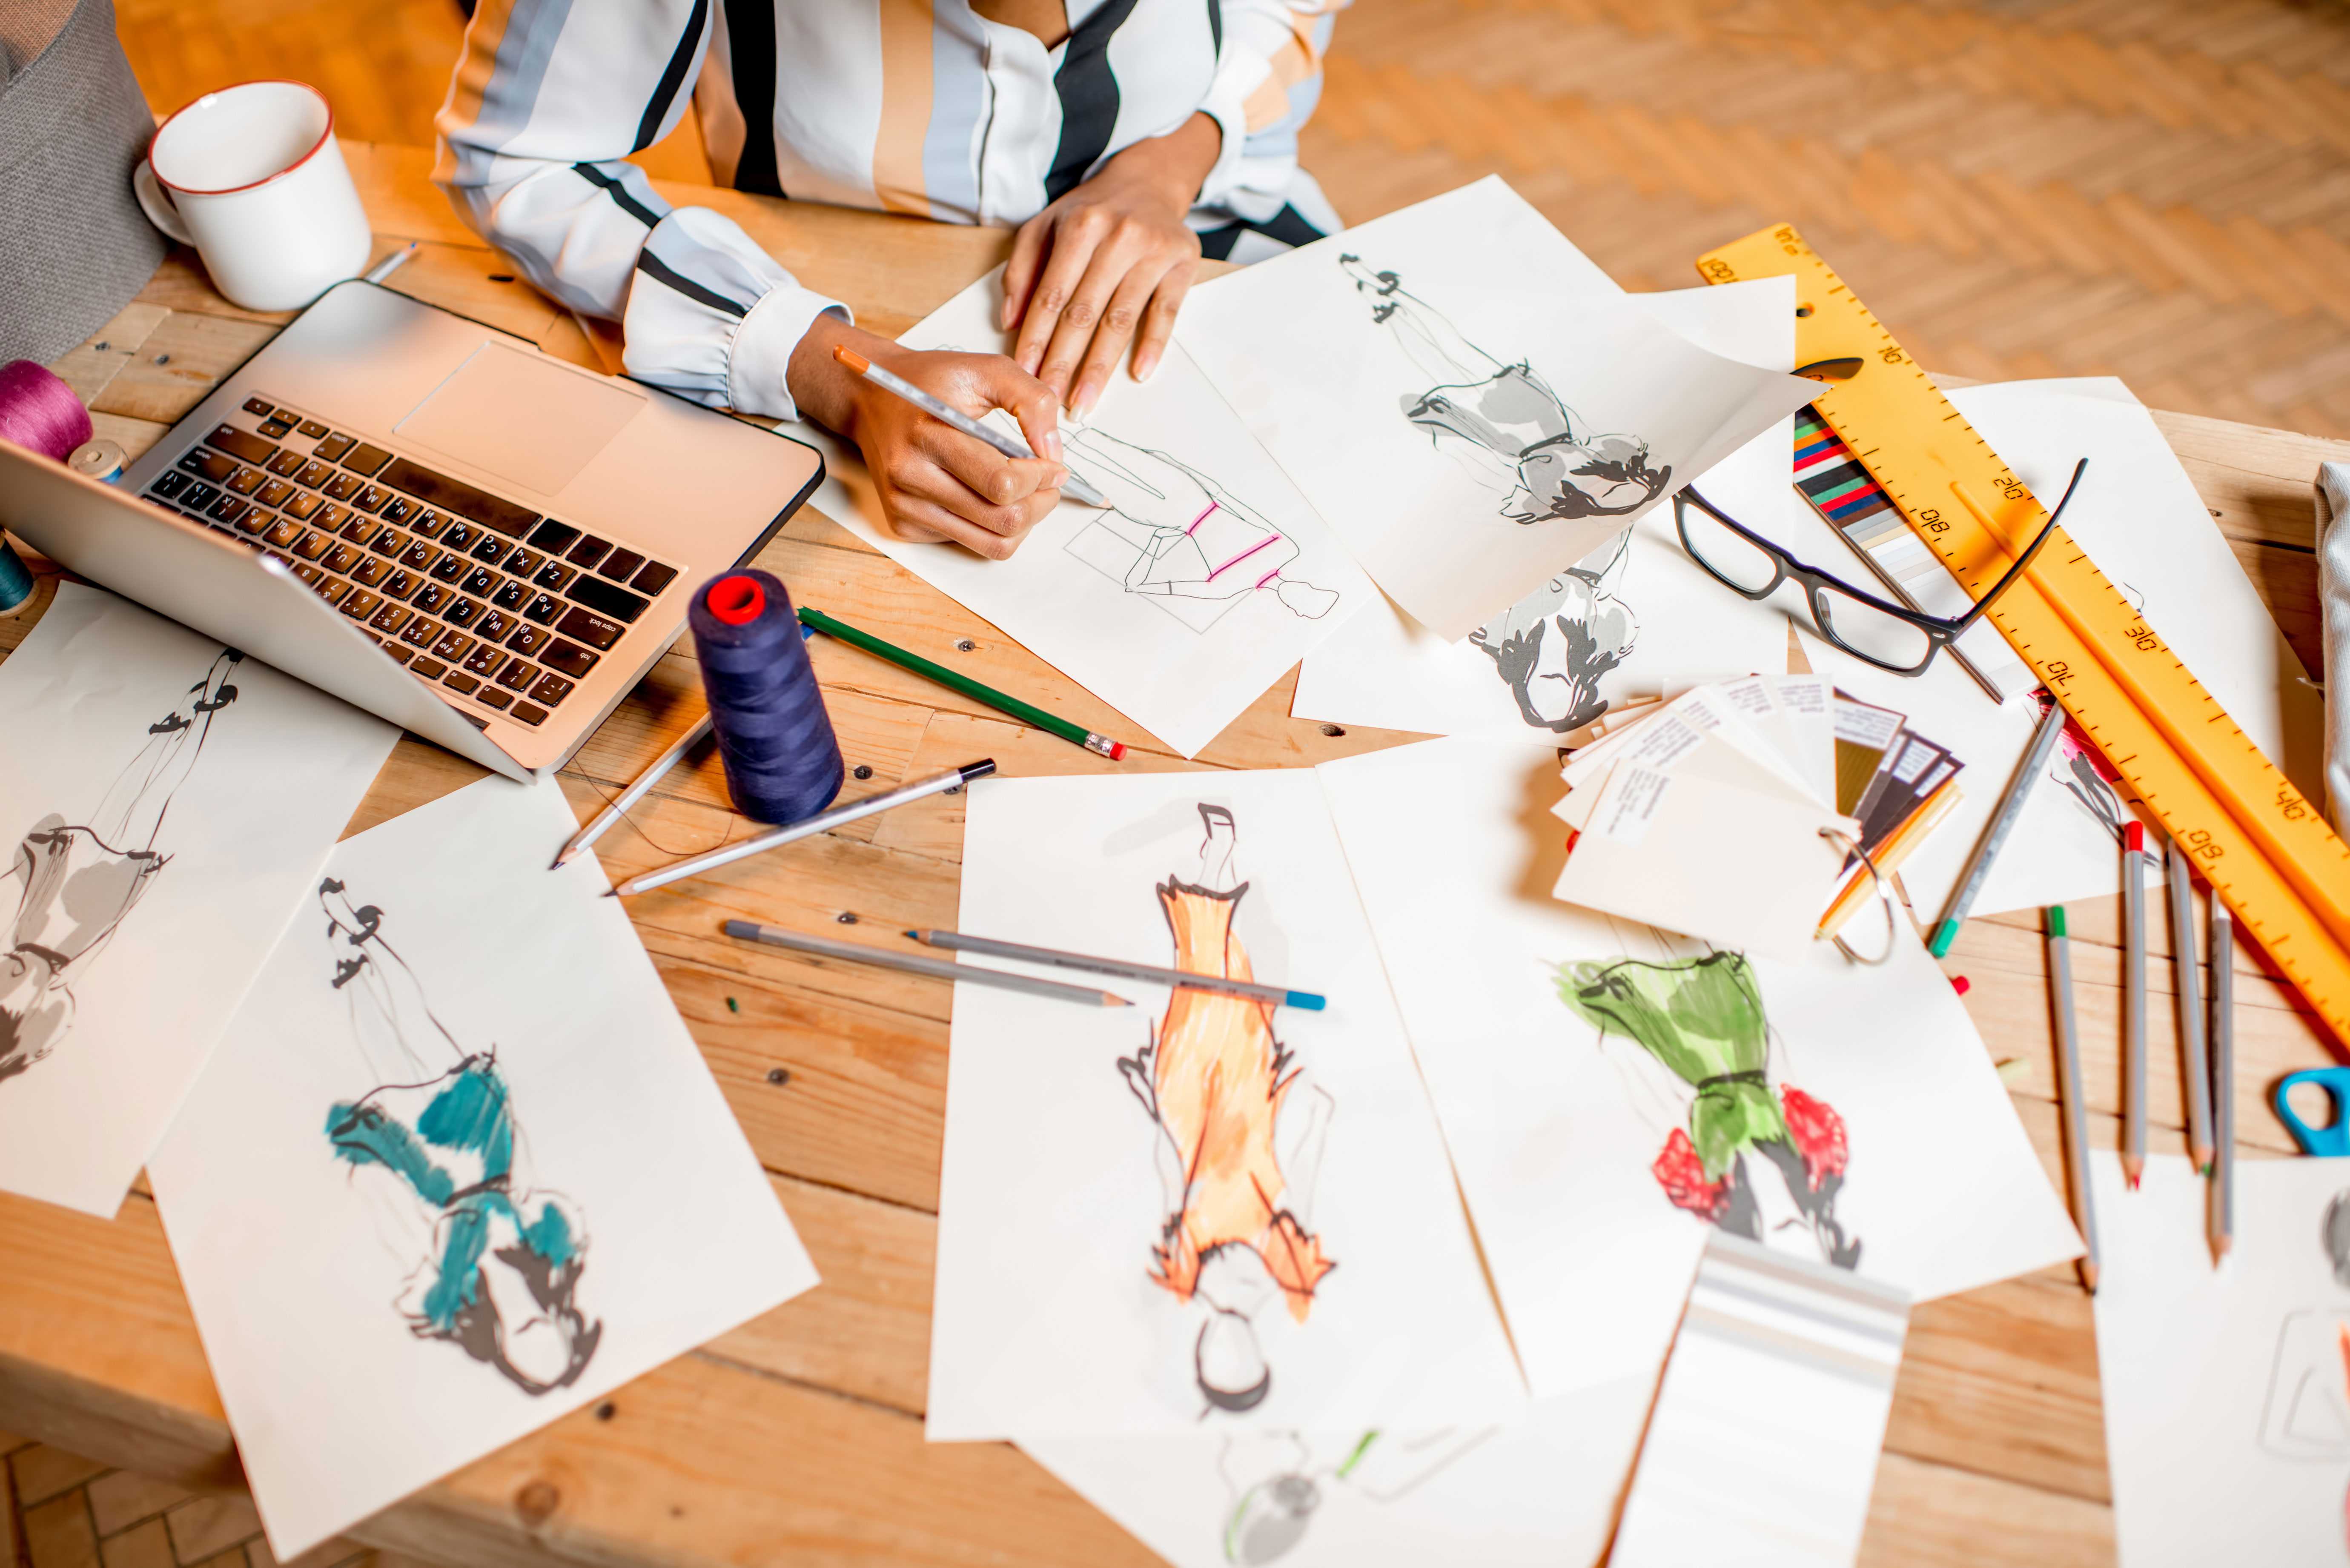 Fashion designer working with clothes and drawings